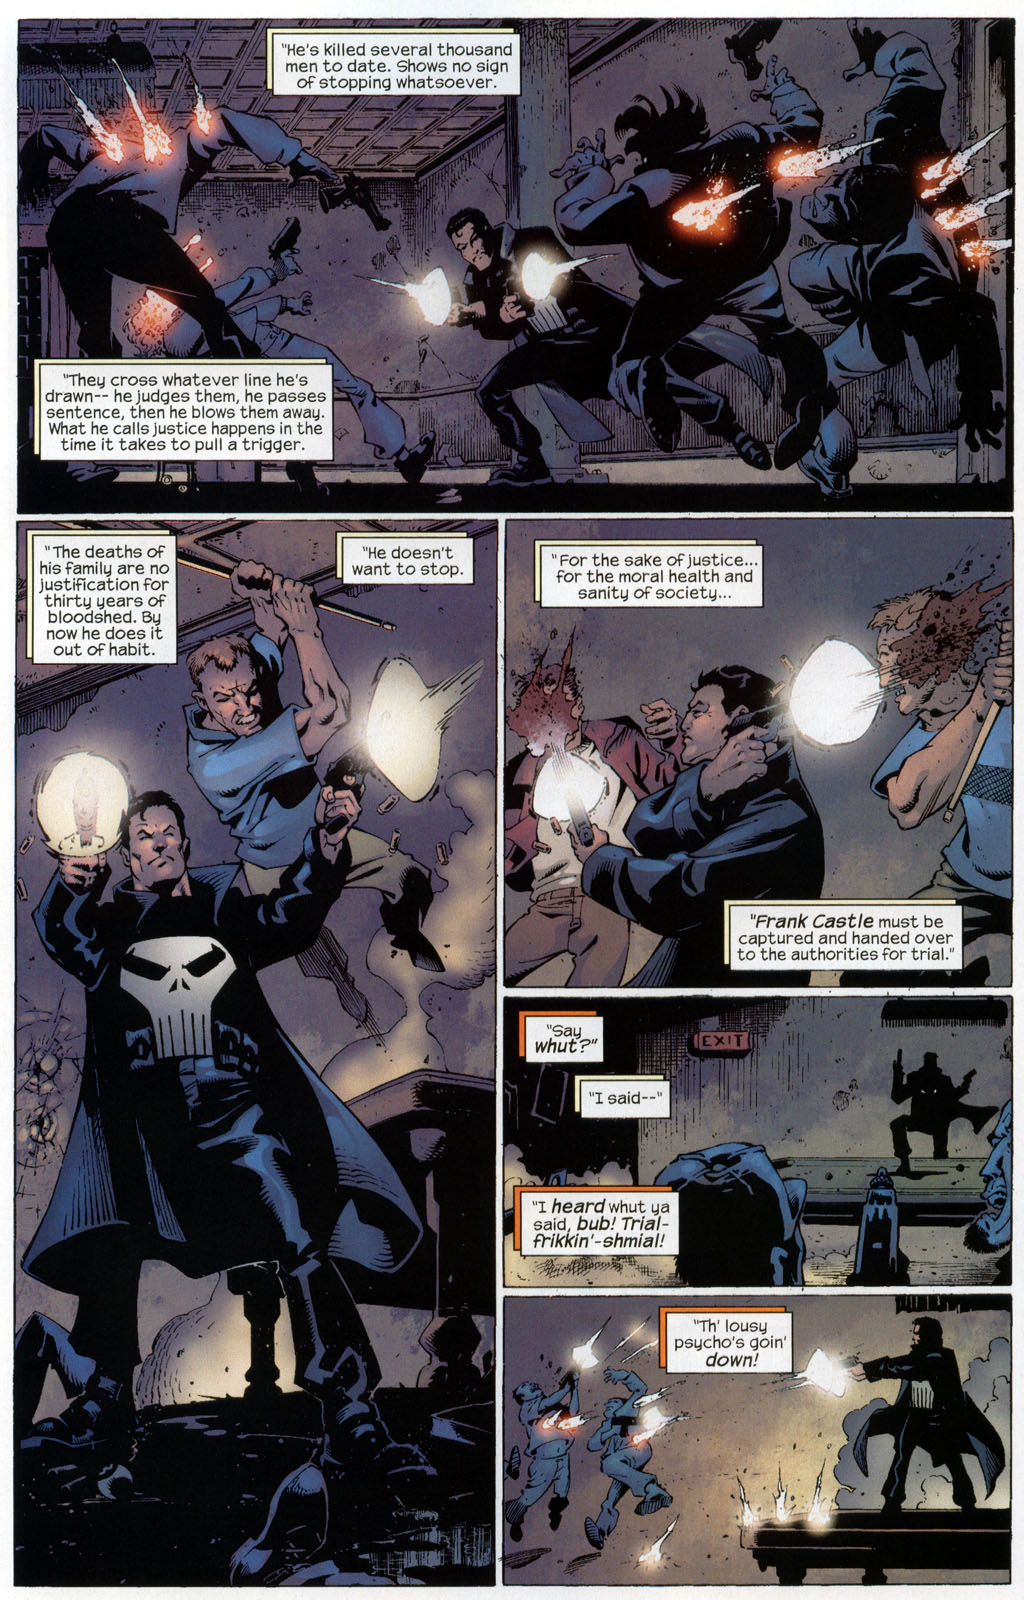 The Punisher (2001) issue 33 - Confederacy of Dunces #01 - Page 3